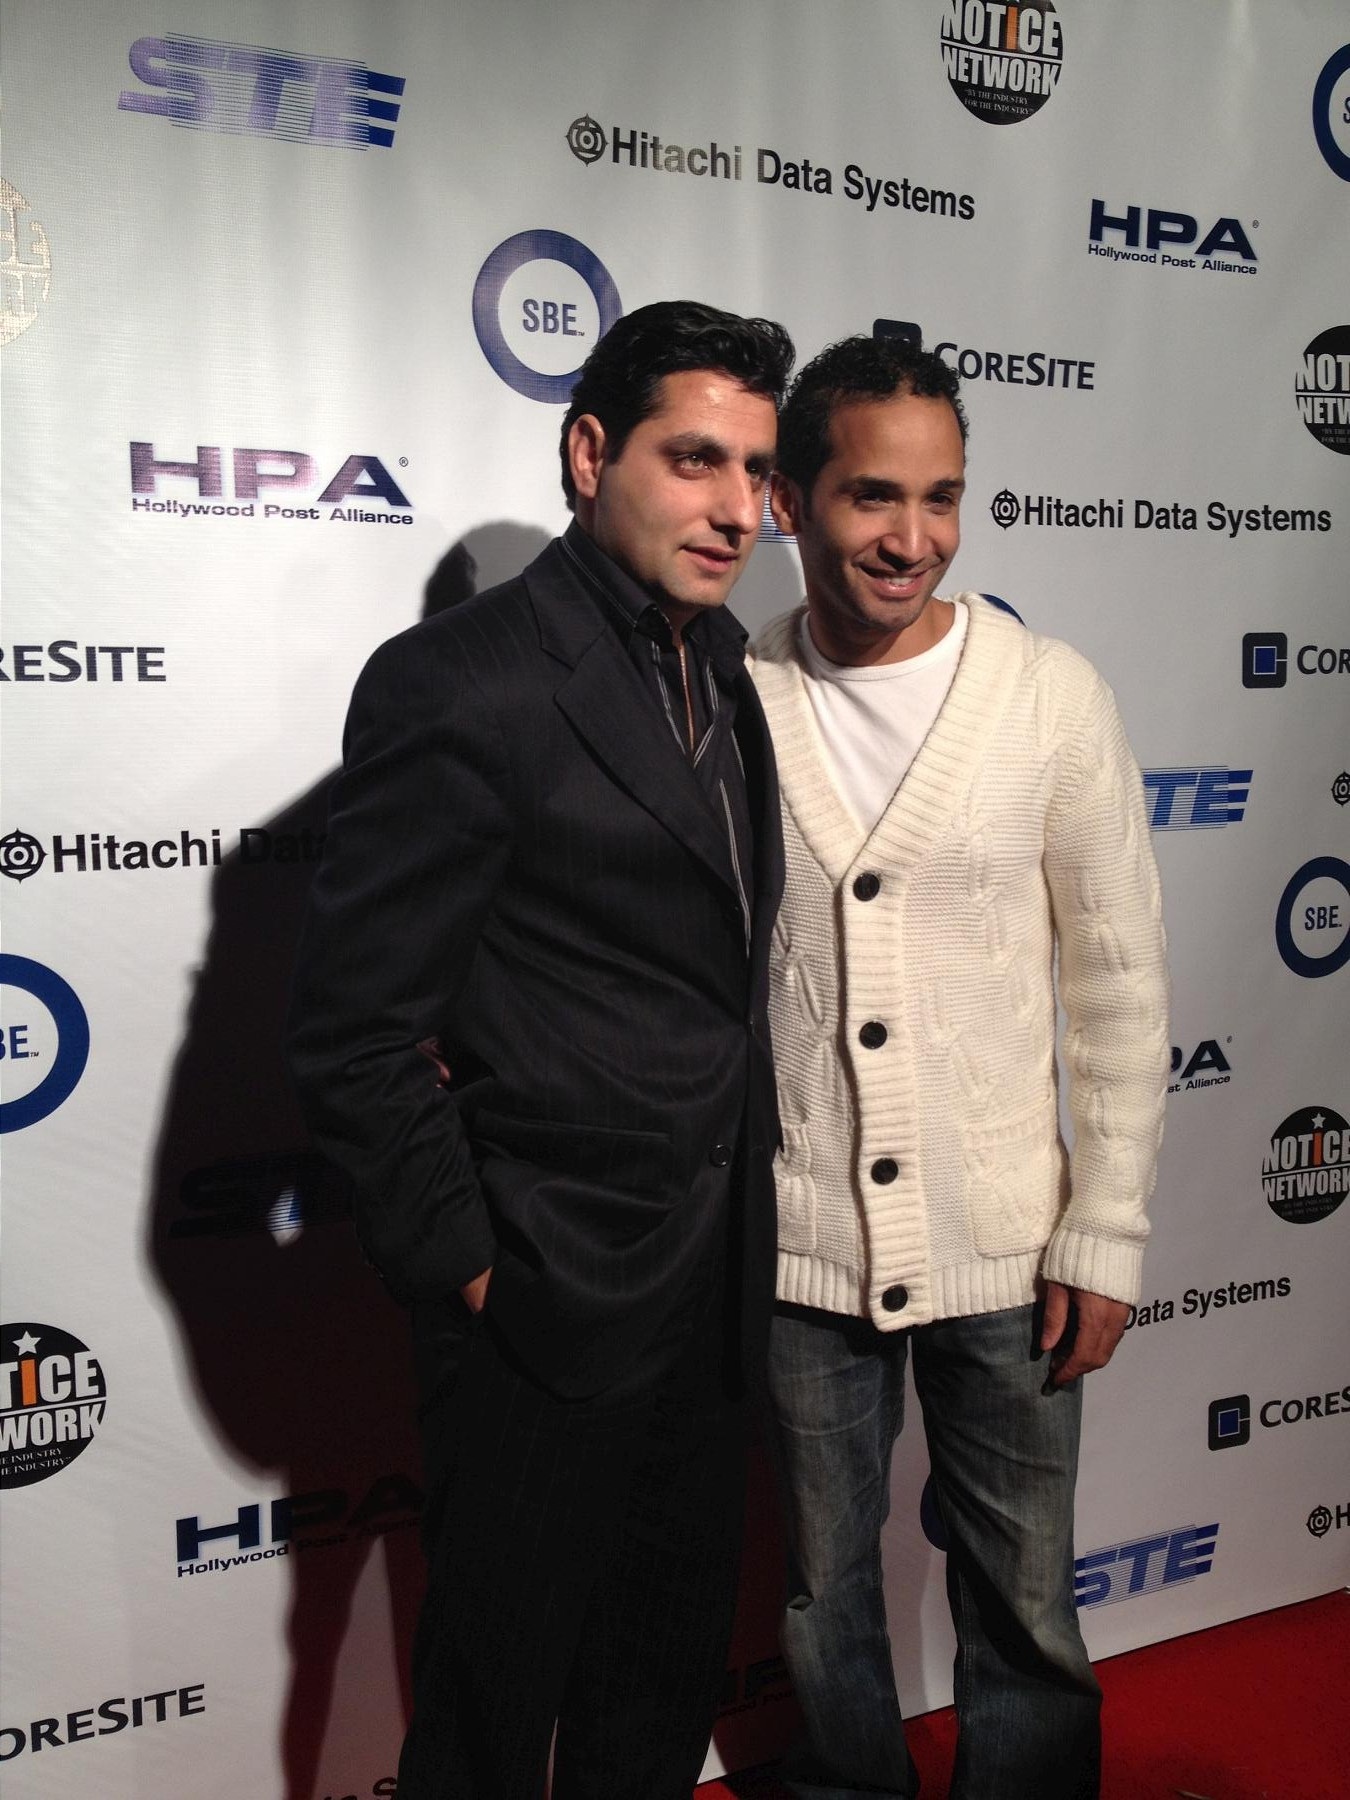 Hollywood TV and Motion Picture mixer party red carpet. 2012